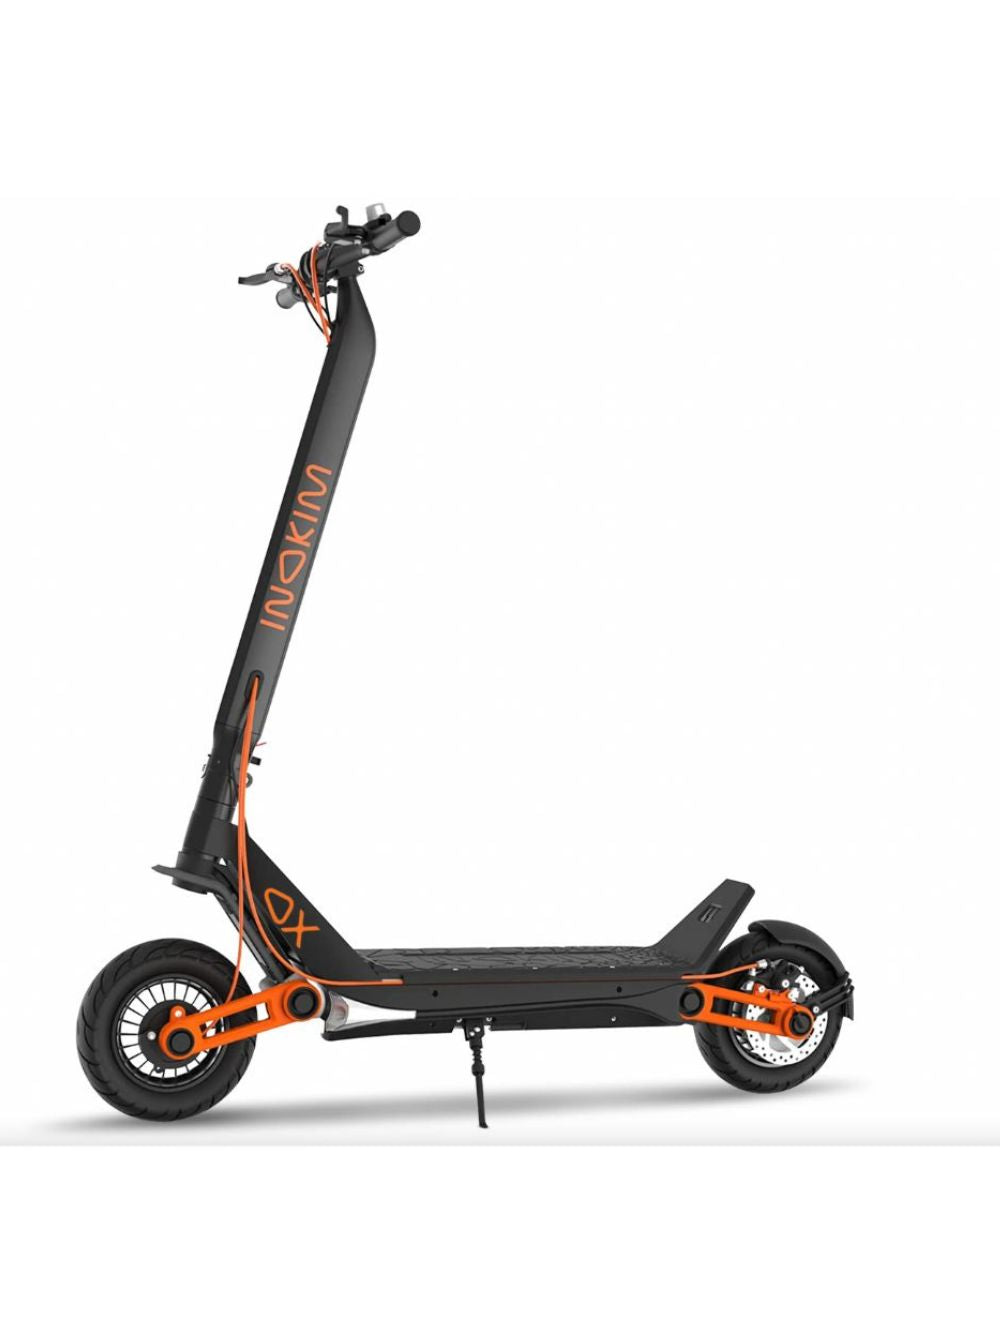 Inokim OX Super | Electric Scooter | Official UK Seller